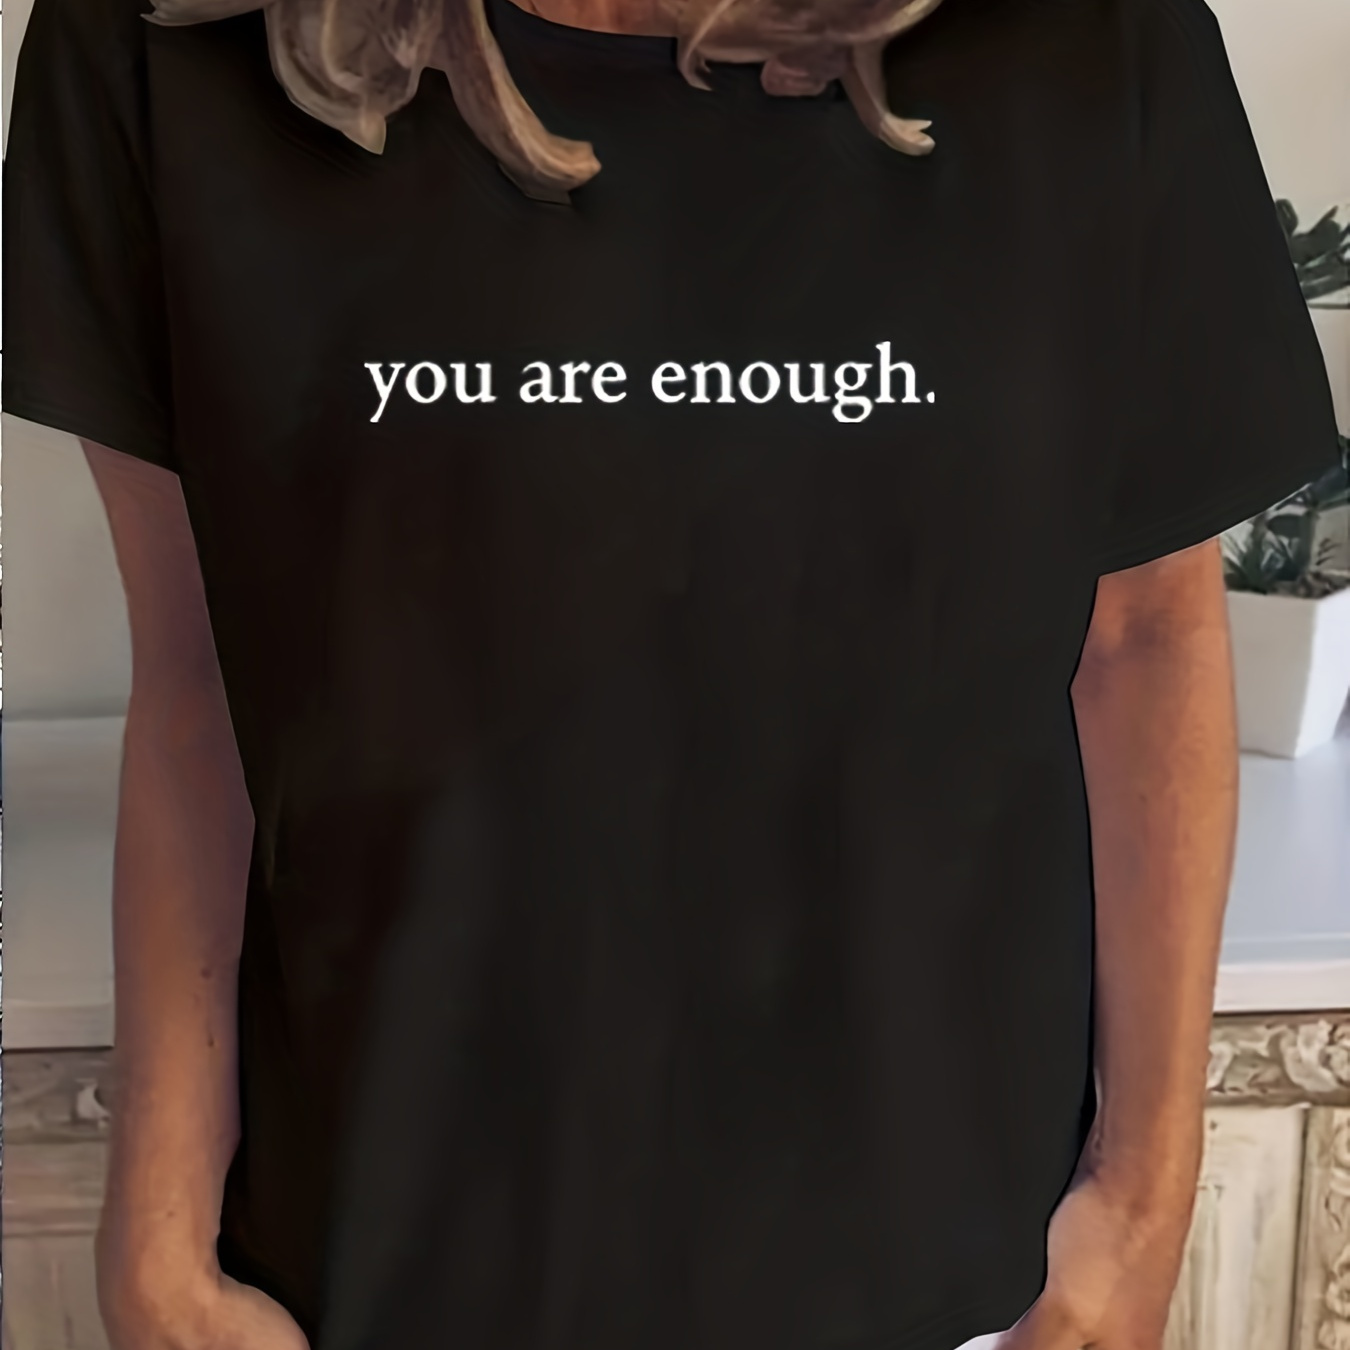 

You Are Enough Print T-shirt, Short Sleeve Crew Neck Casual Top For Summer & Spring, Women's Clothing